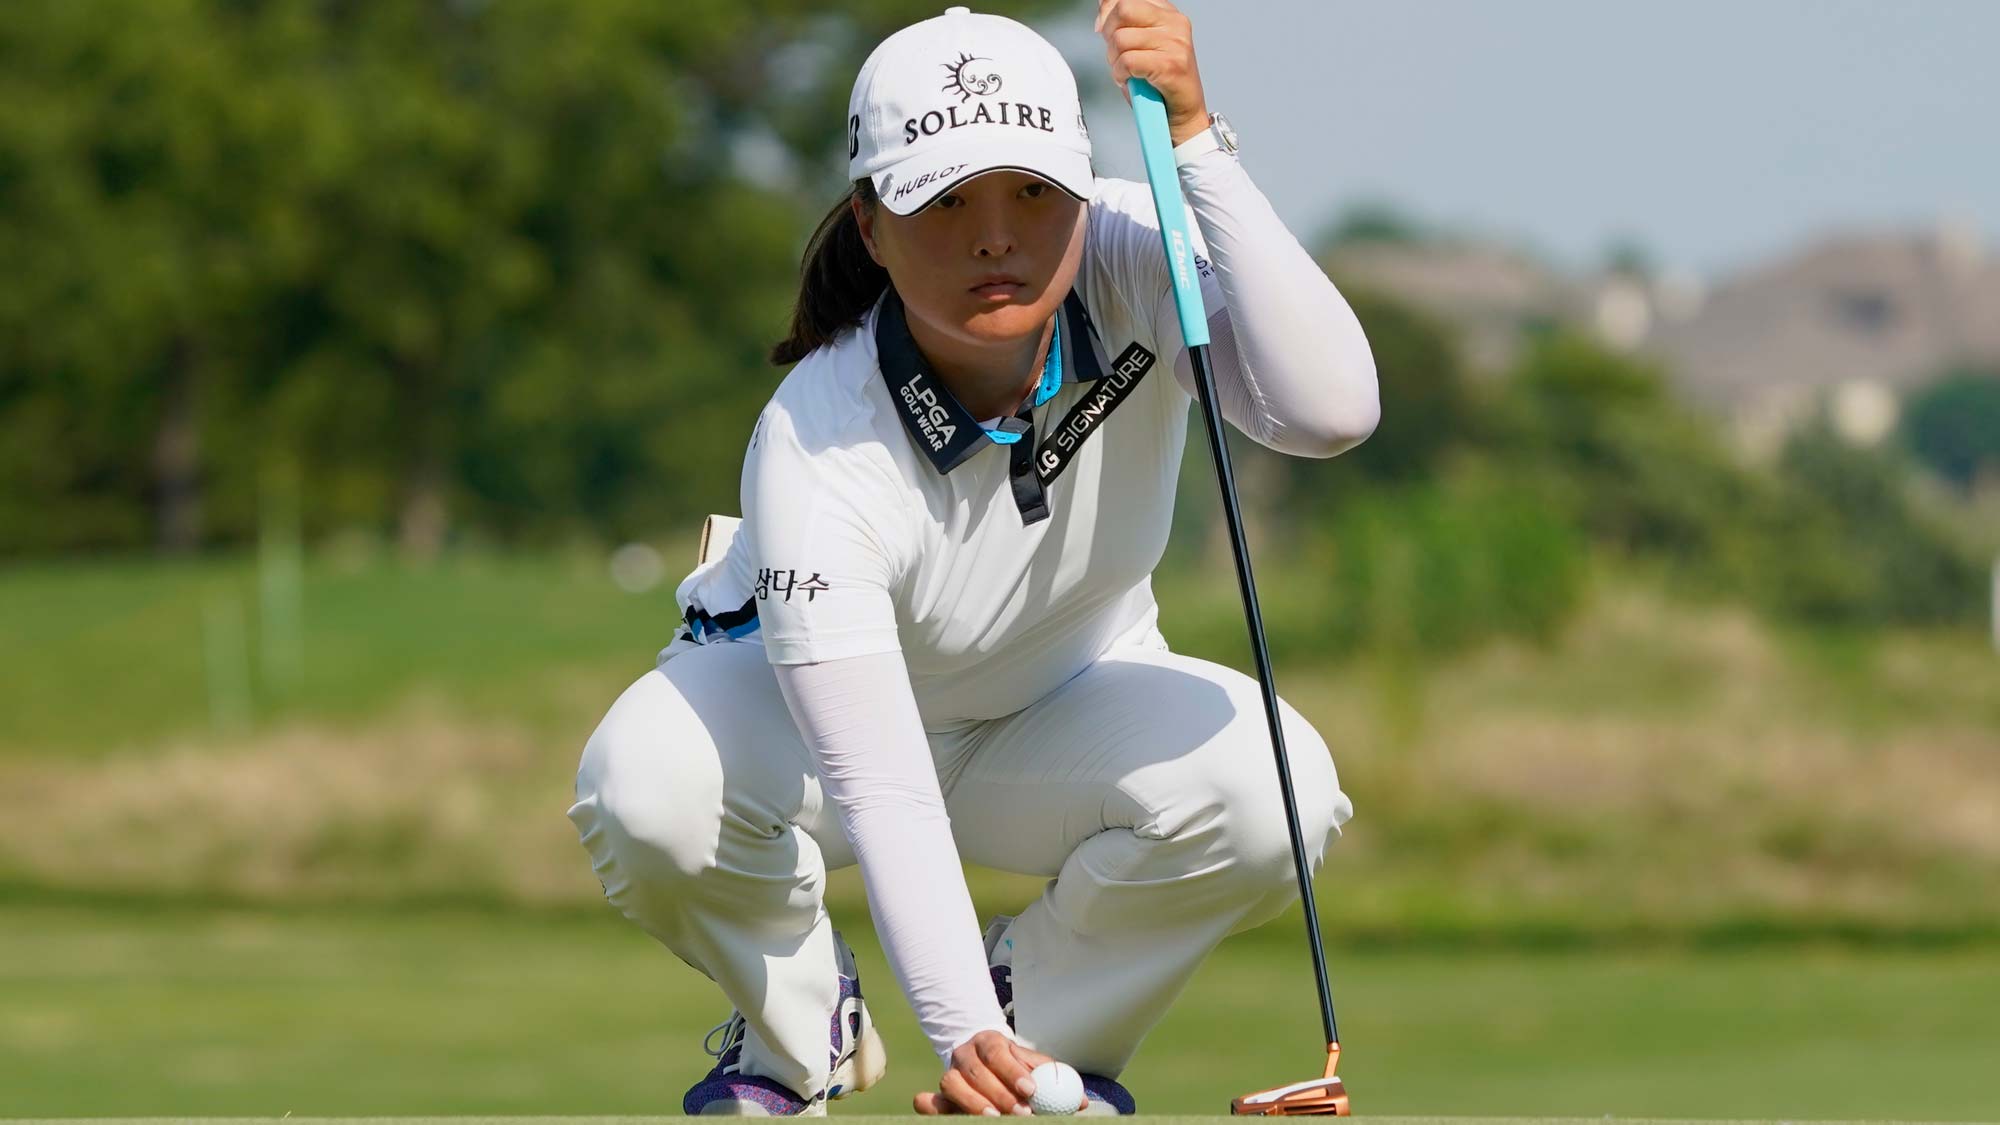 Jin Young Ko of Korea lines up a putt on the 12th hole during the final round of the Volunteers of America Classic